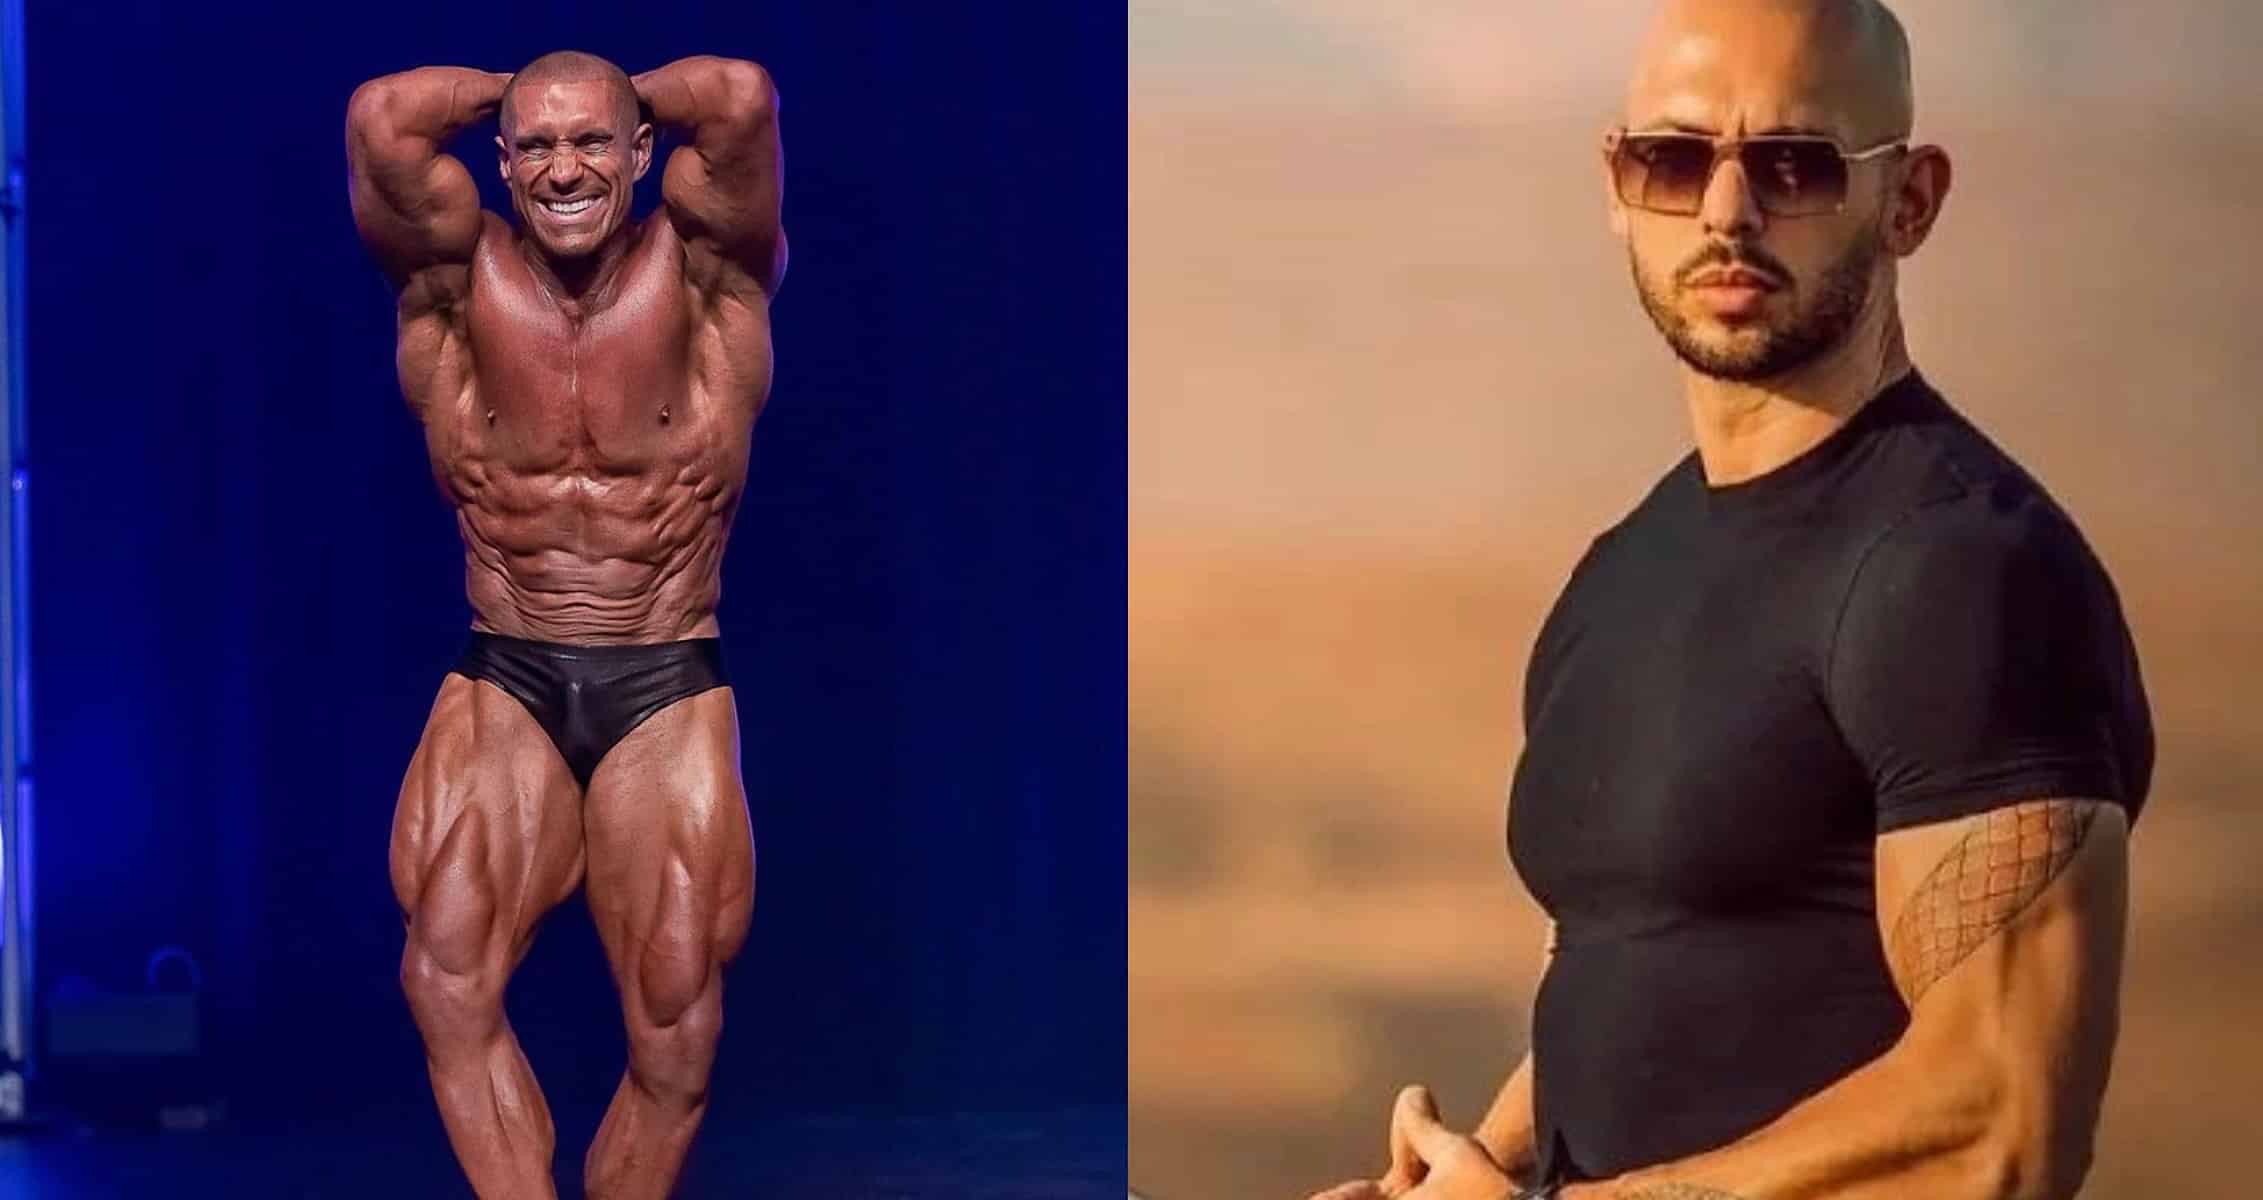 Andrew Tate Trashes Bodybuilders: “Bodybuilders Are All P*****s”